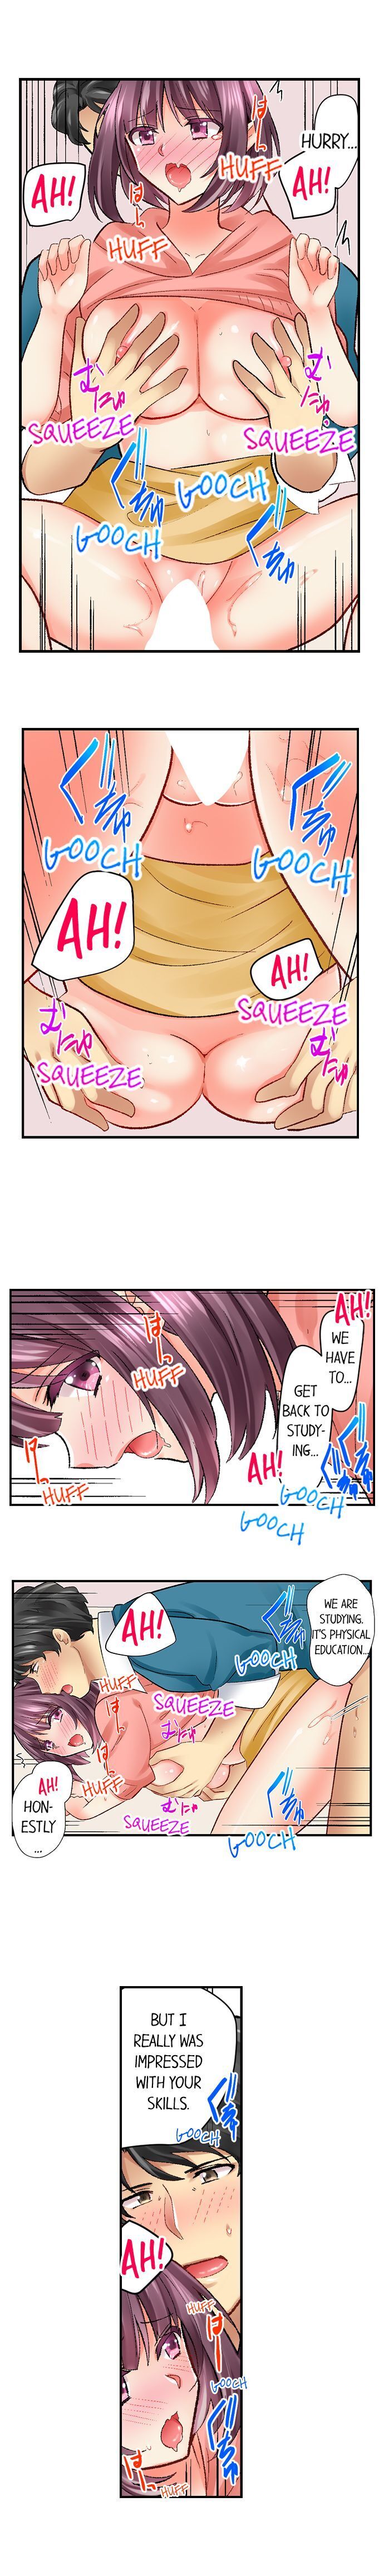 Our Kinky Newlywed Life - Chapter 39 Page 4